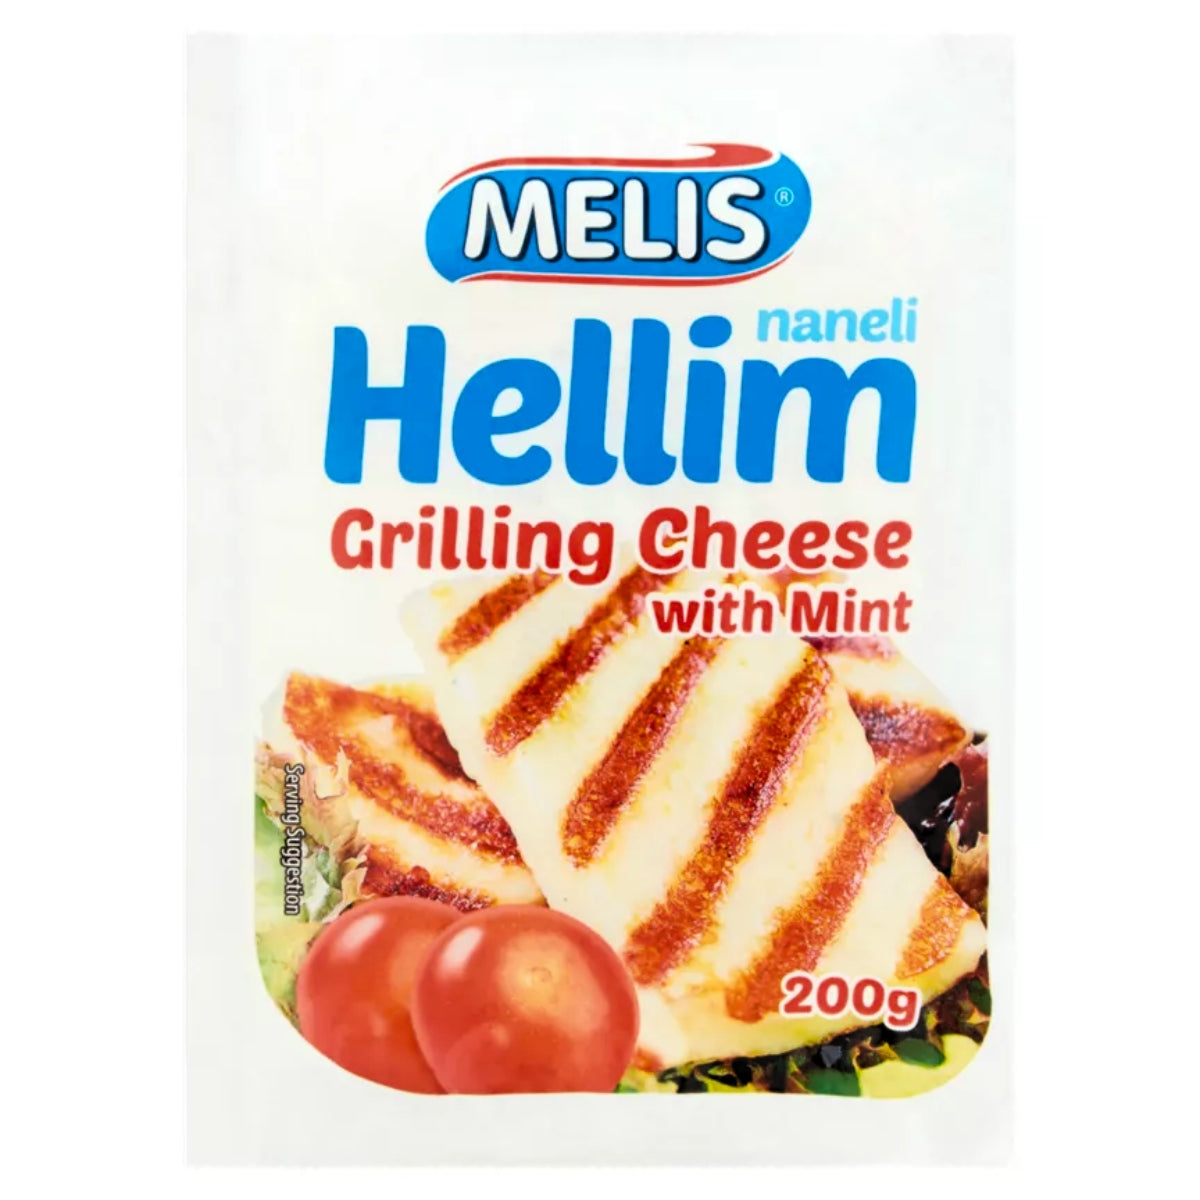 Melis - Hellim Grilling Cheese (Halloumi) - 200g grilled cheese with mint.